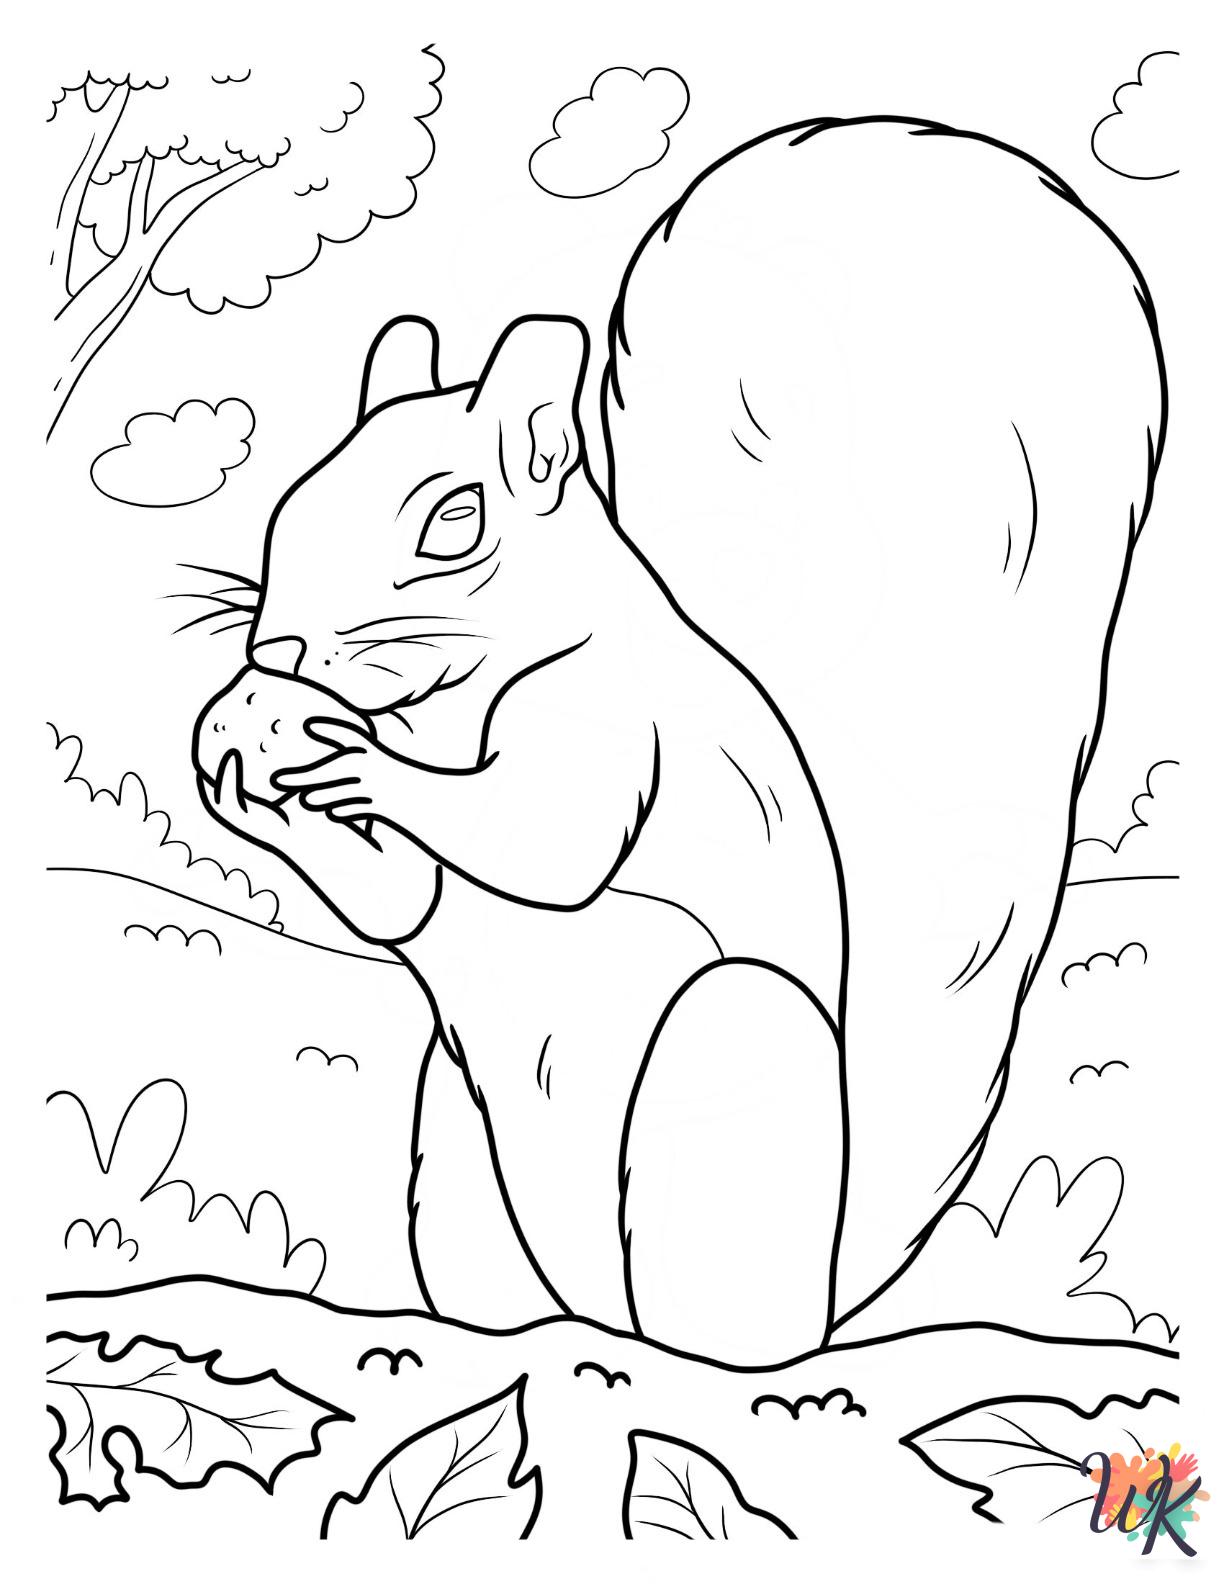 Squirrel decorations coloring pages